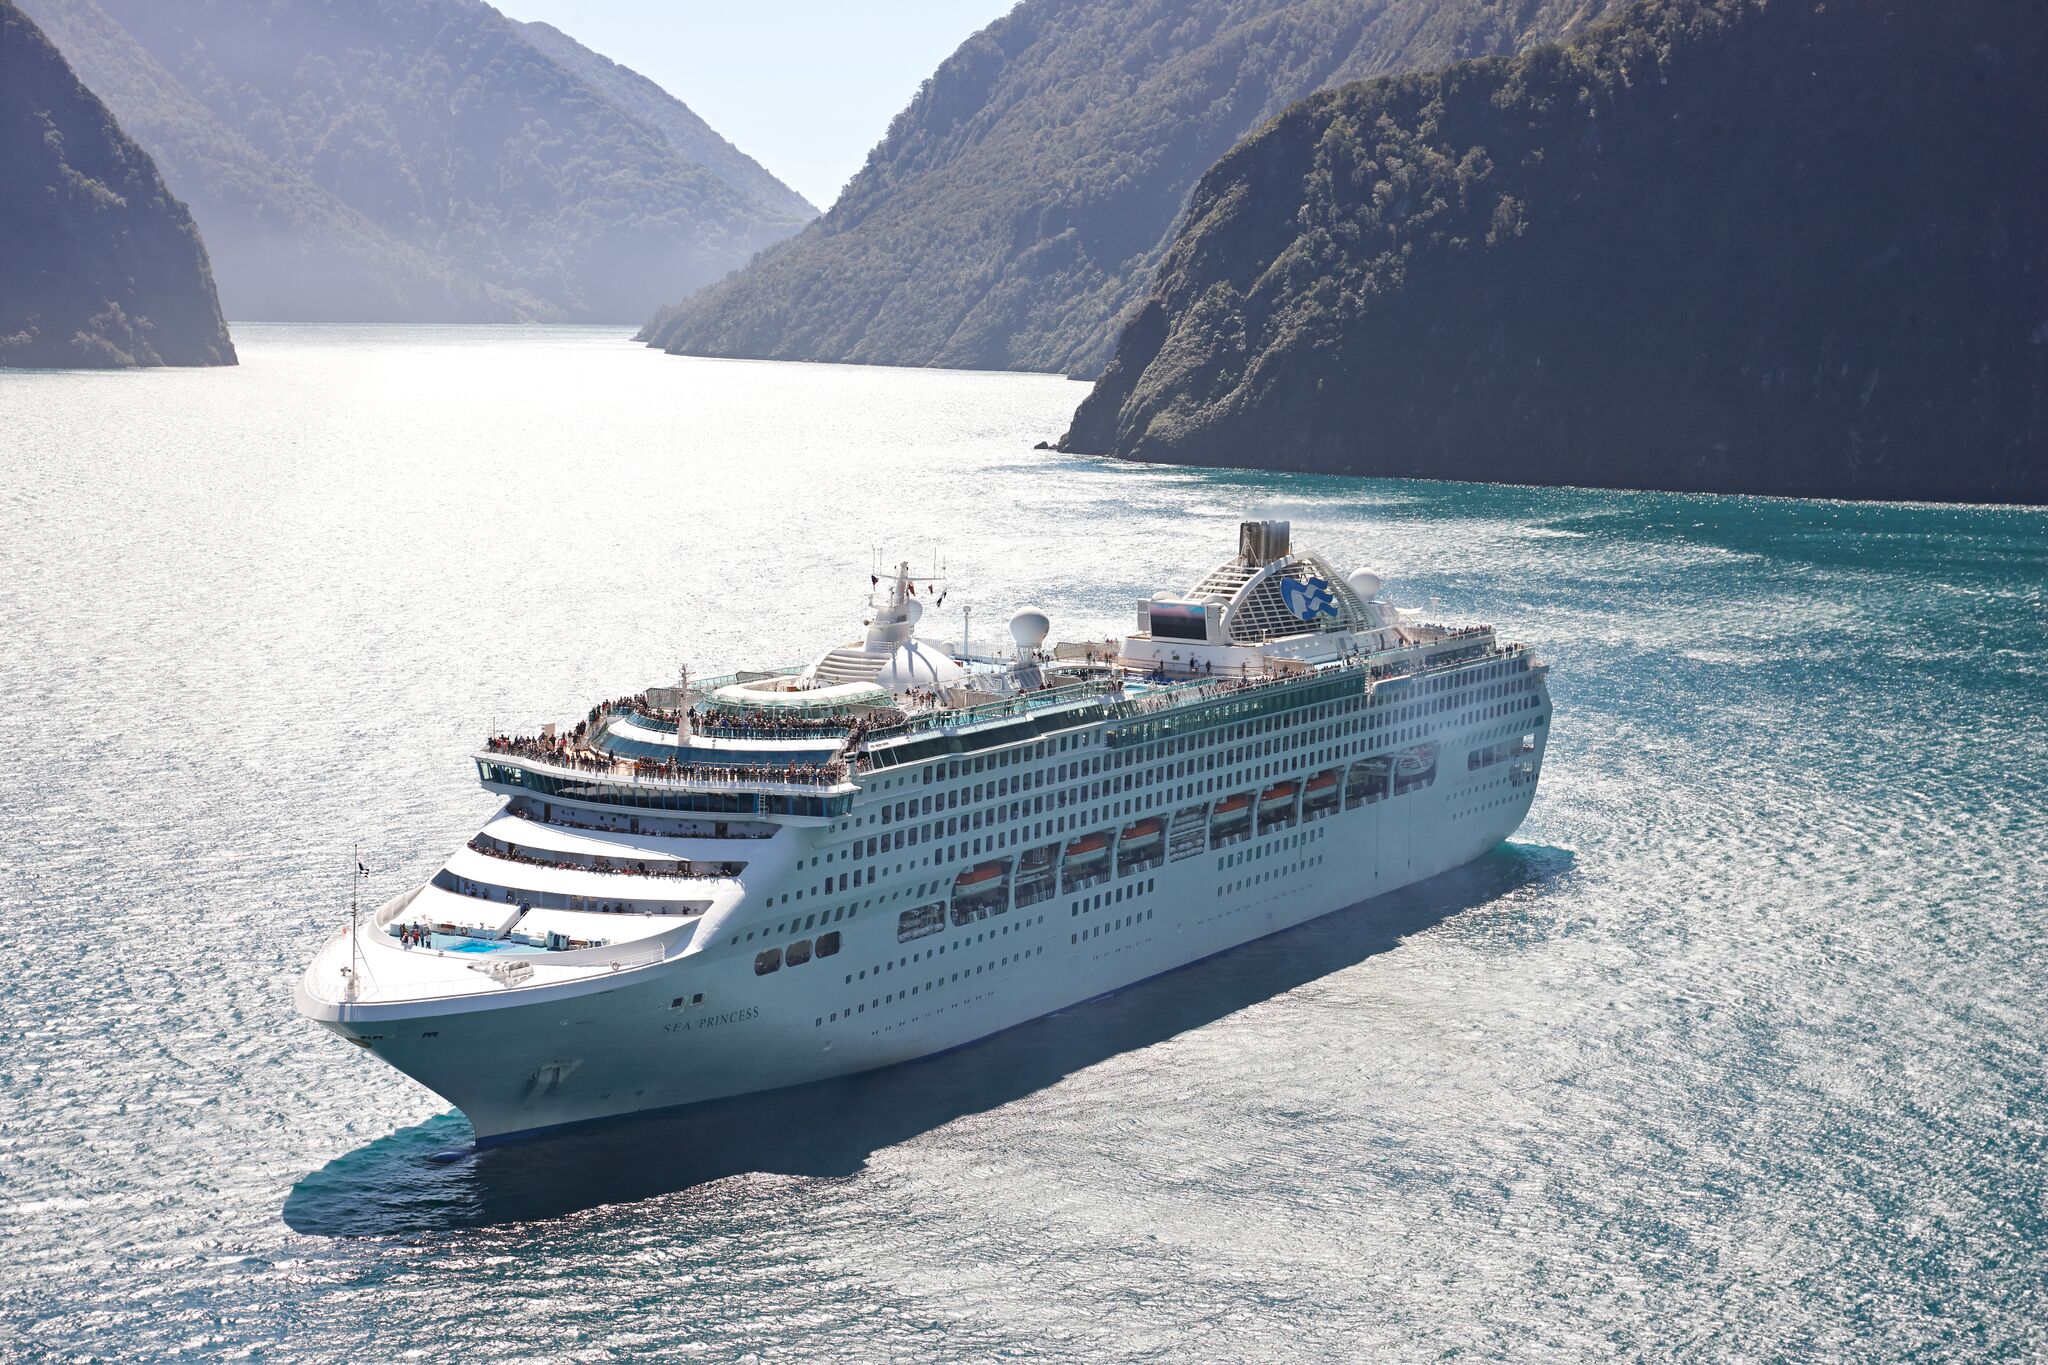 PRINCESS CRUISES MAKES LARGEST FINANCIAL COMMITMENT TO WESTERN